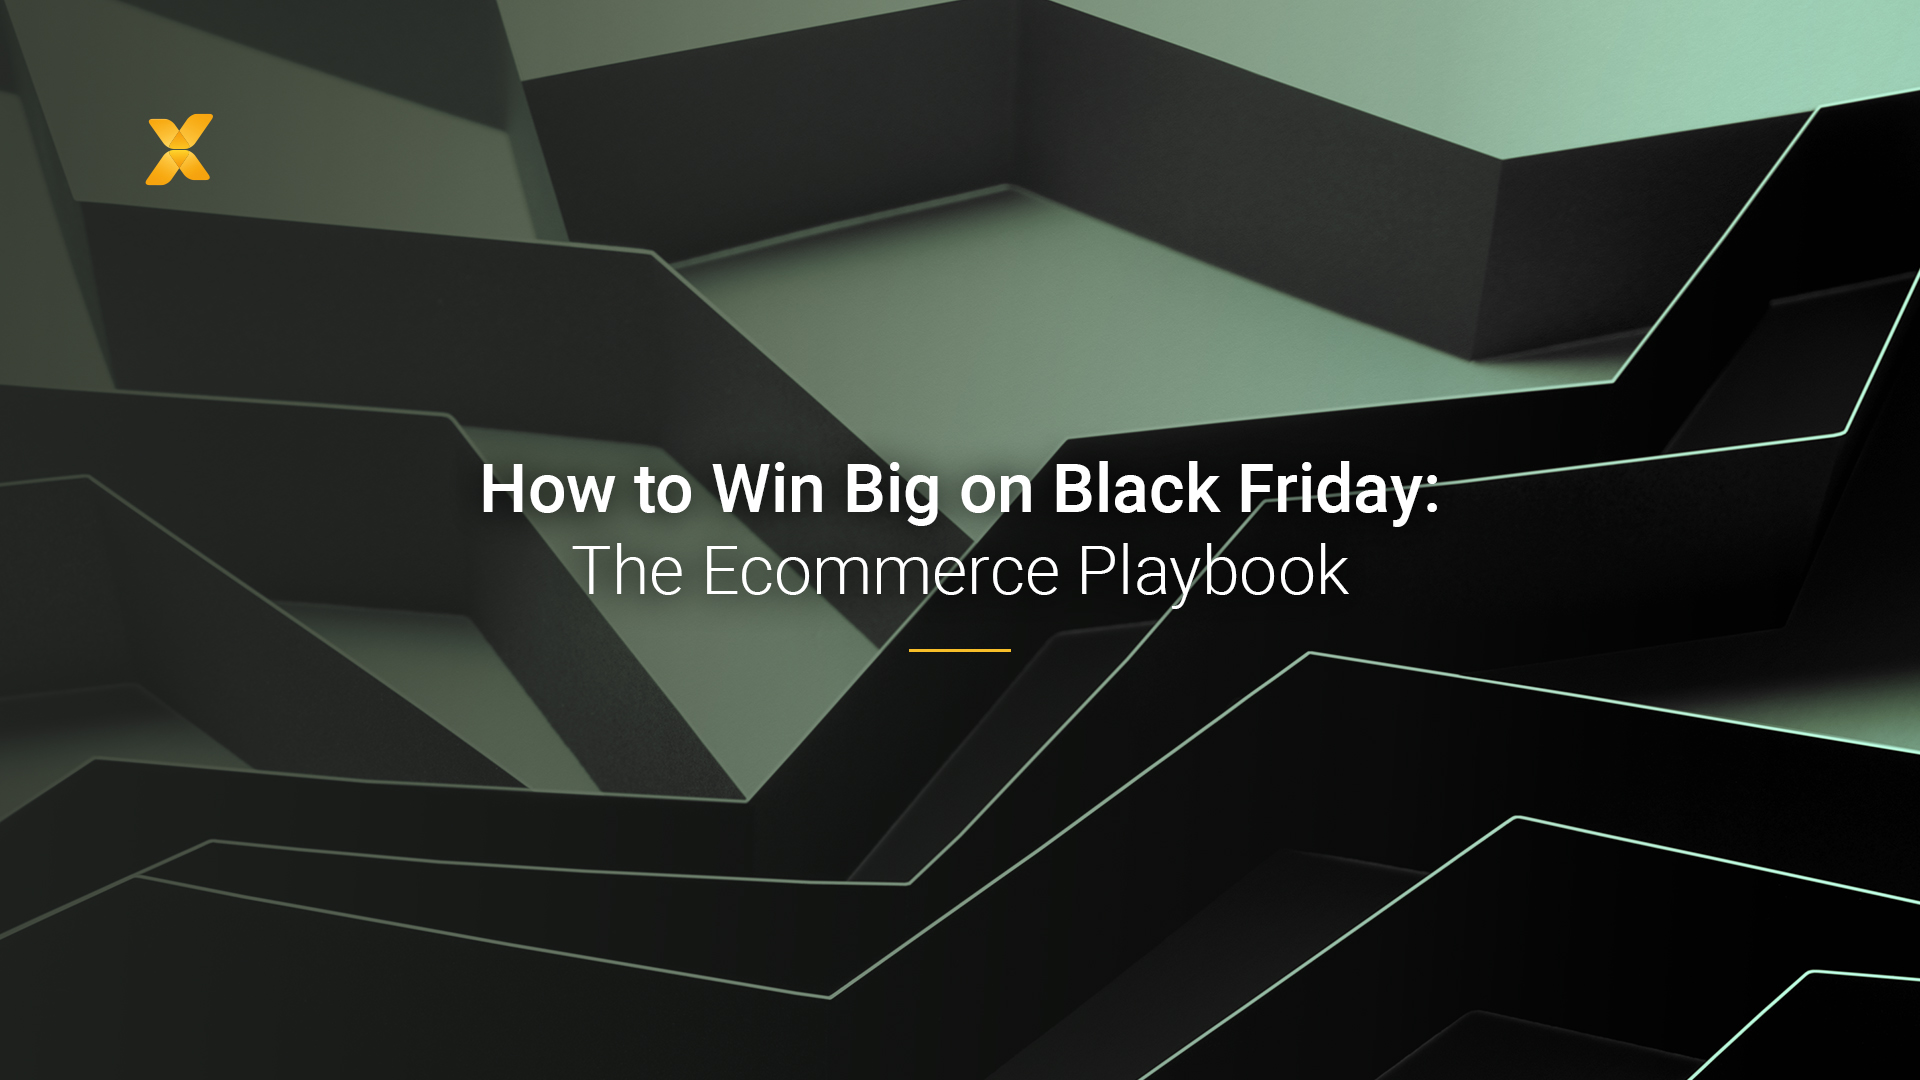 Image by Vaimo with title "How to Win Big on Black Friday: The Ecommerce Playbook."